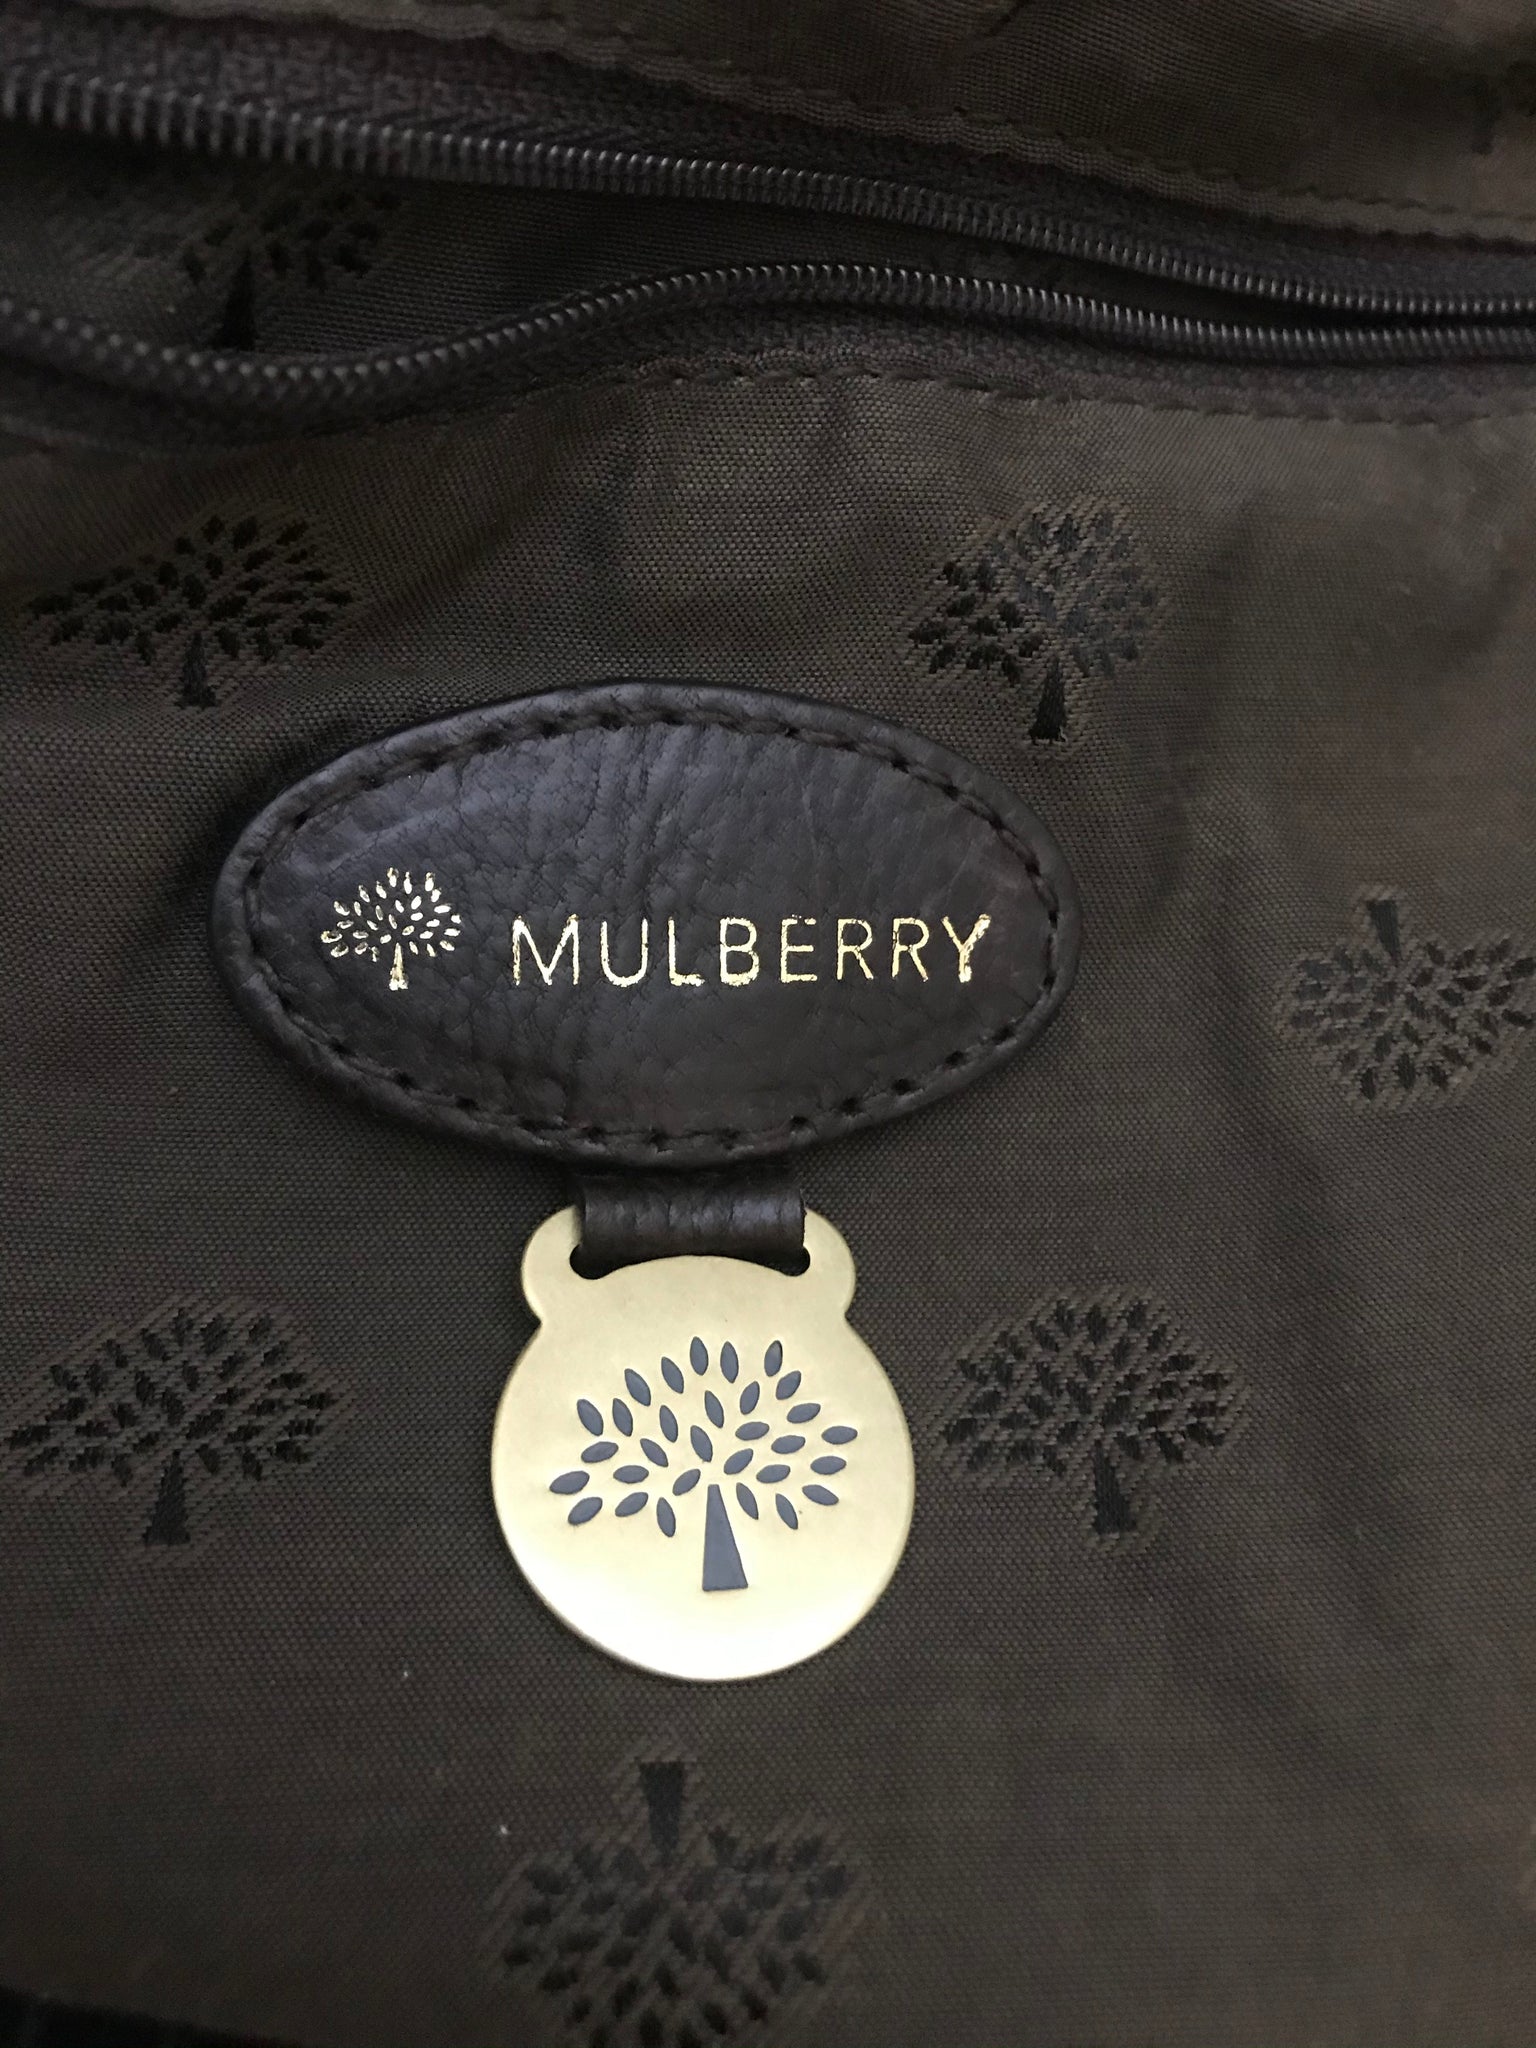 Isabella's Wardrobe Mulberry "Clipper" Hold All.